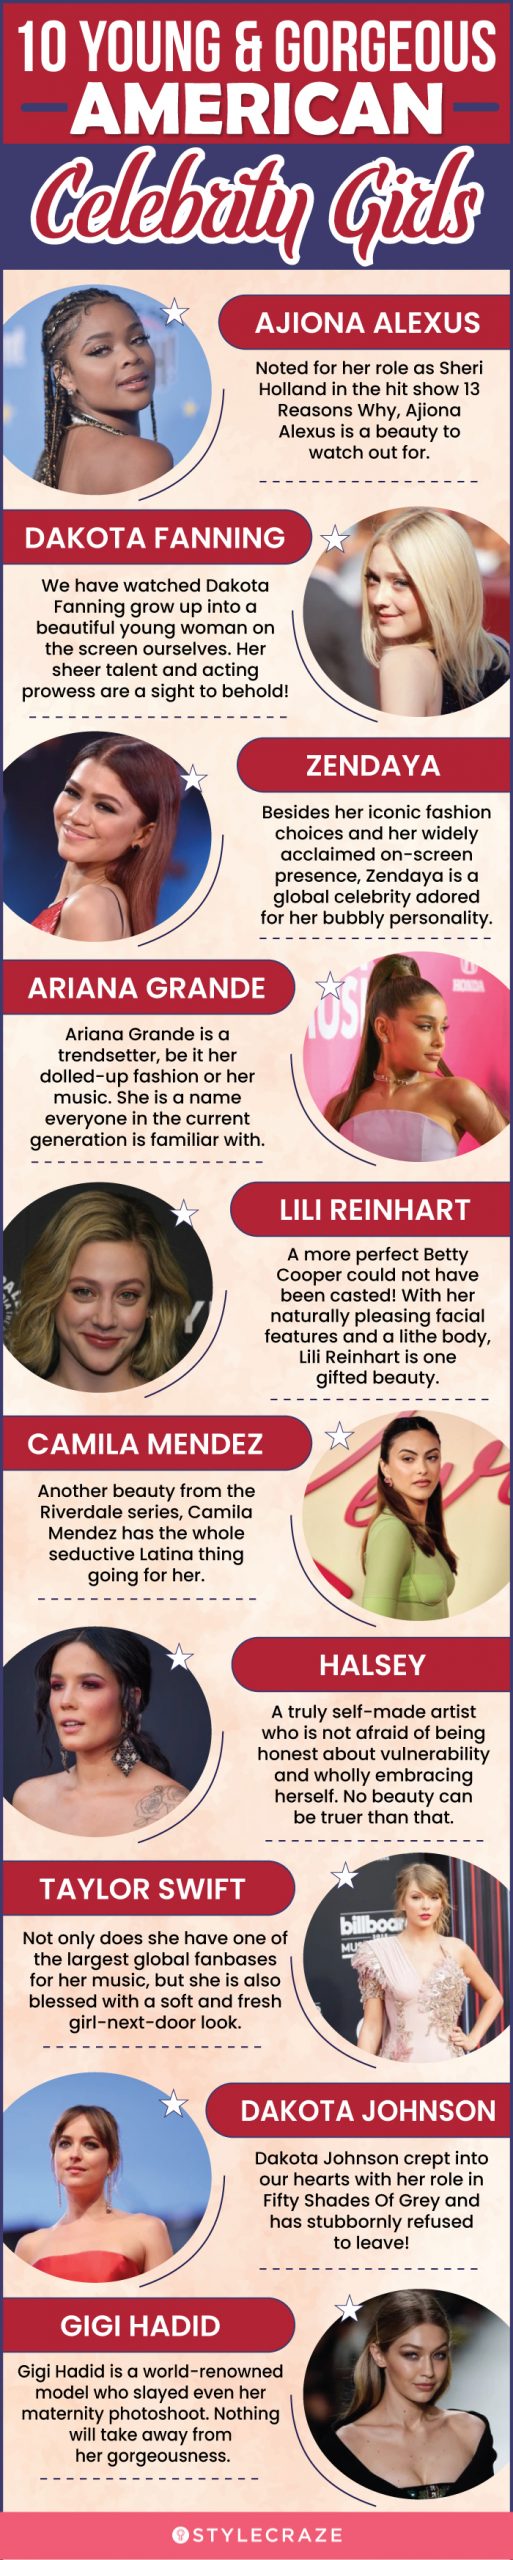 10 young & gorgeous american celebrity girls (infographic)